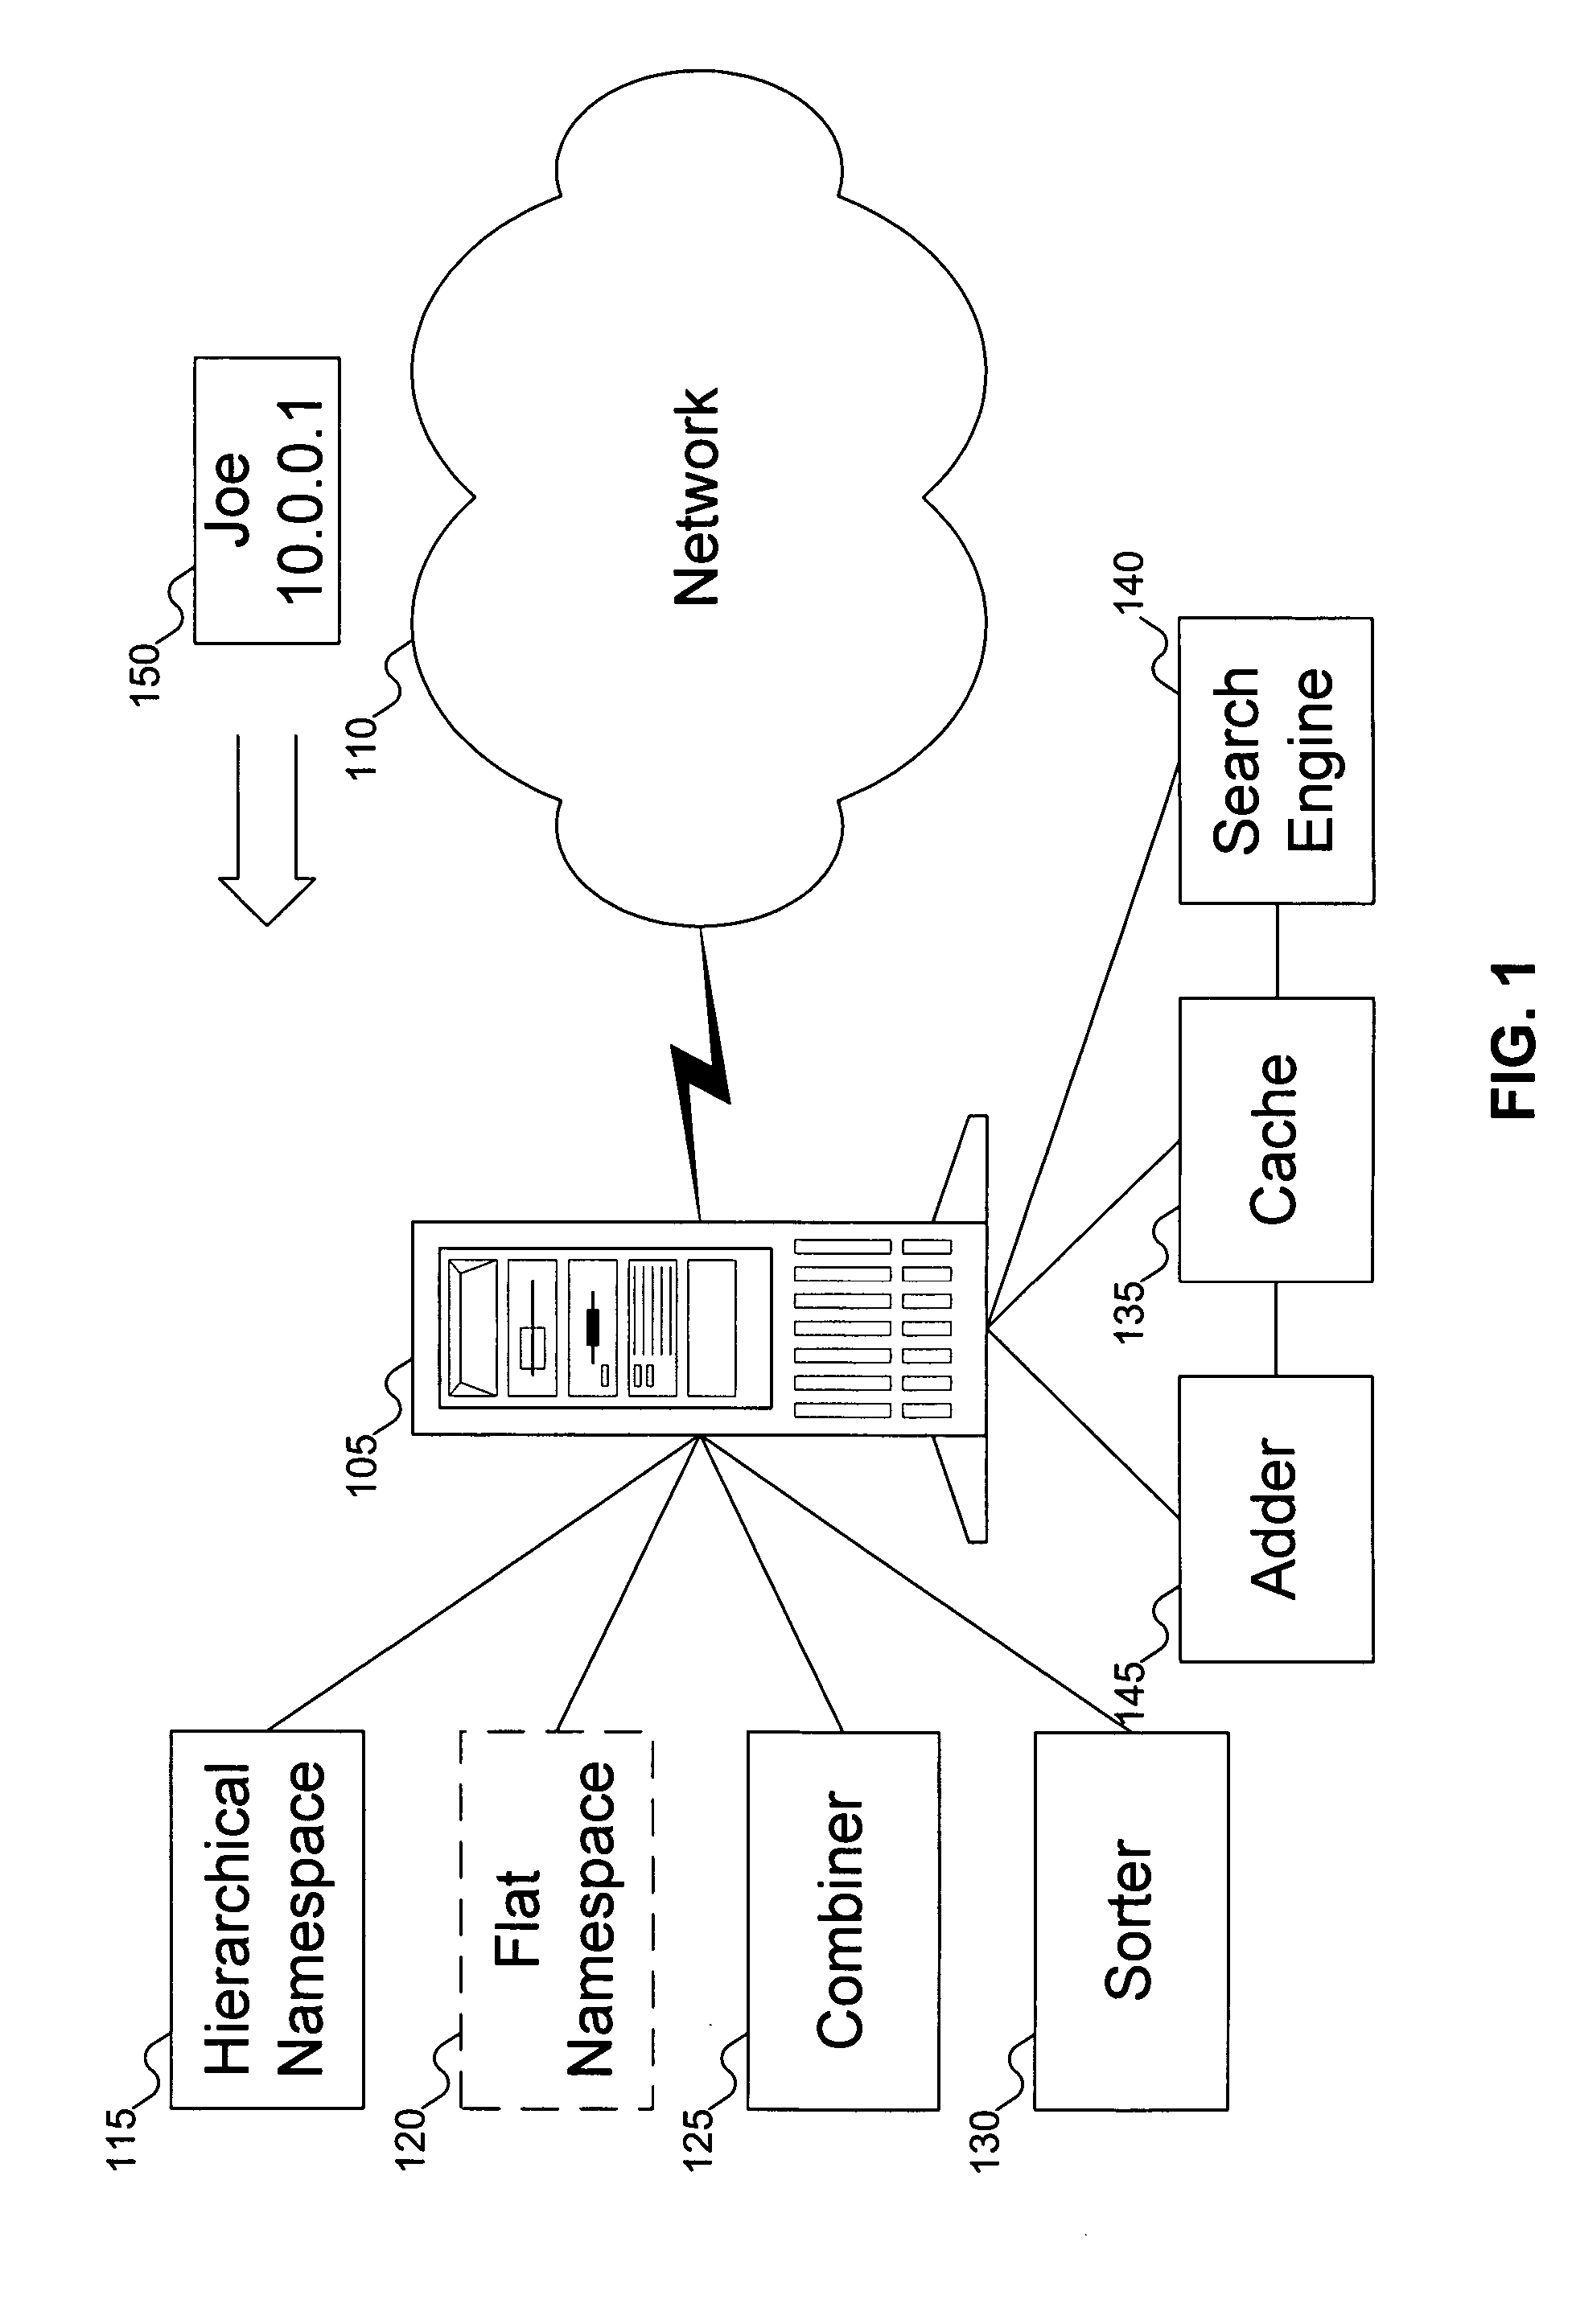 Method for providing a flat view of a hierarchical namespace without requiring unique leaf names